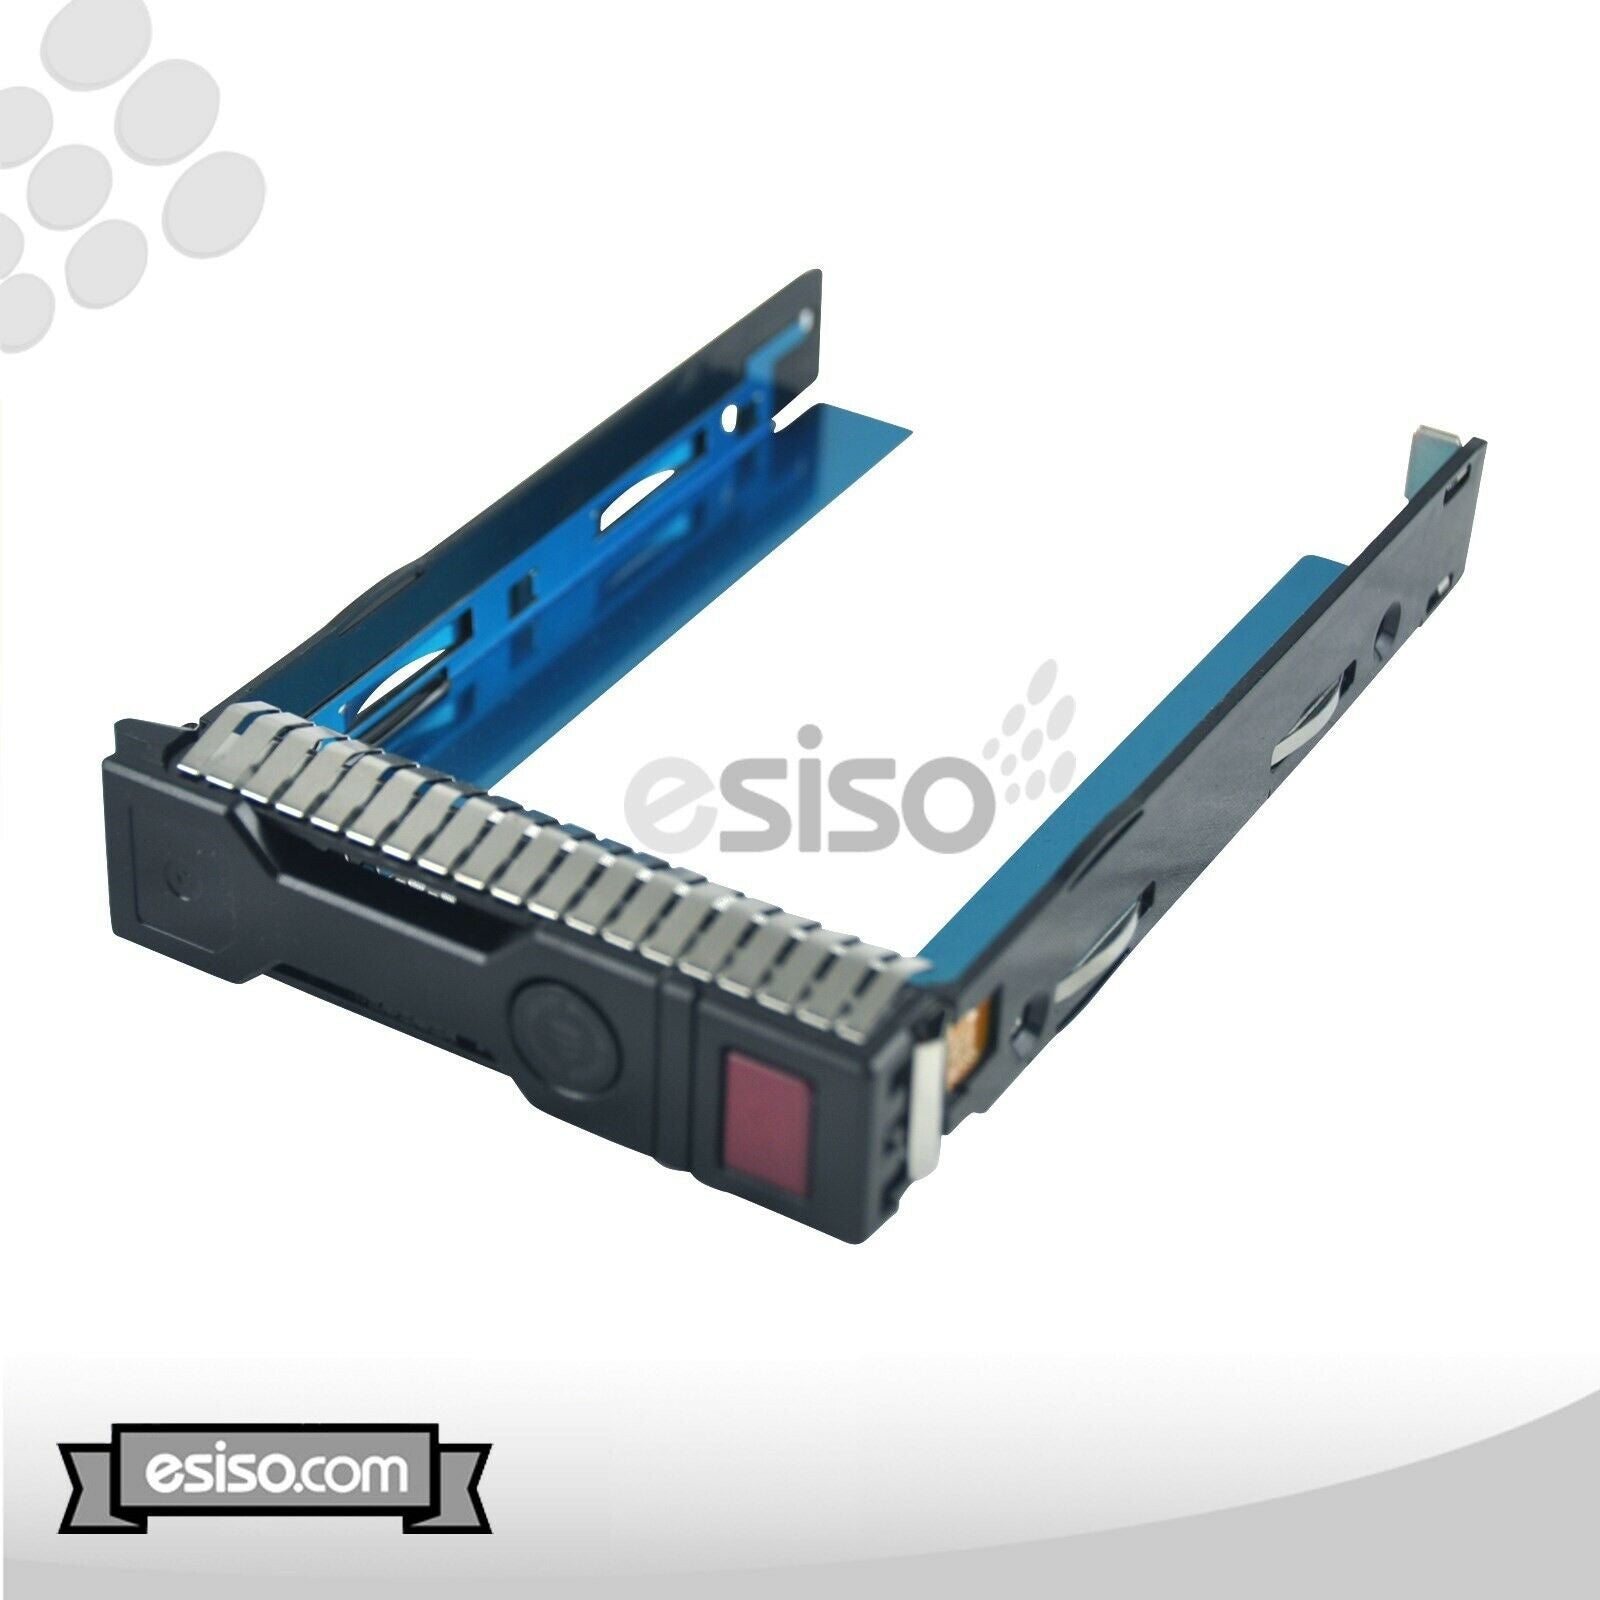 LOT OF 4 651314-001 HPE TRAY FOR 3.5'' SAS/SATA DRIVE TRAY DL360P DL380P G8 G9